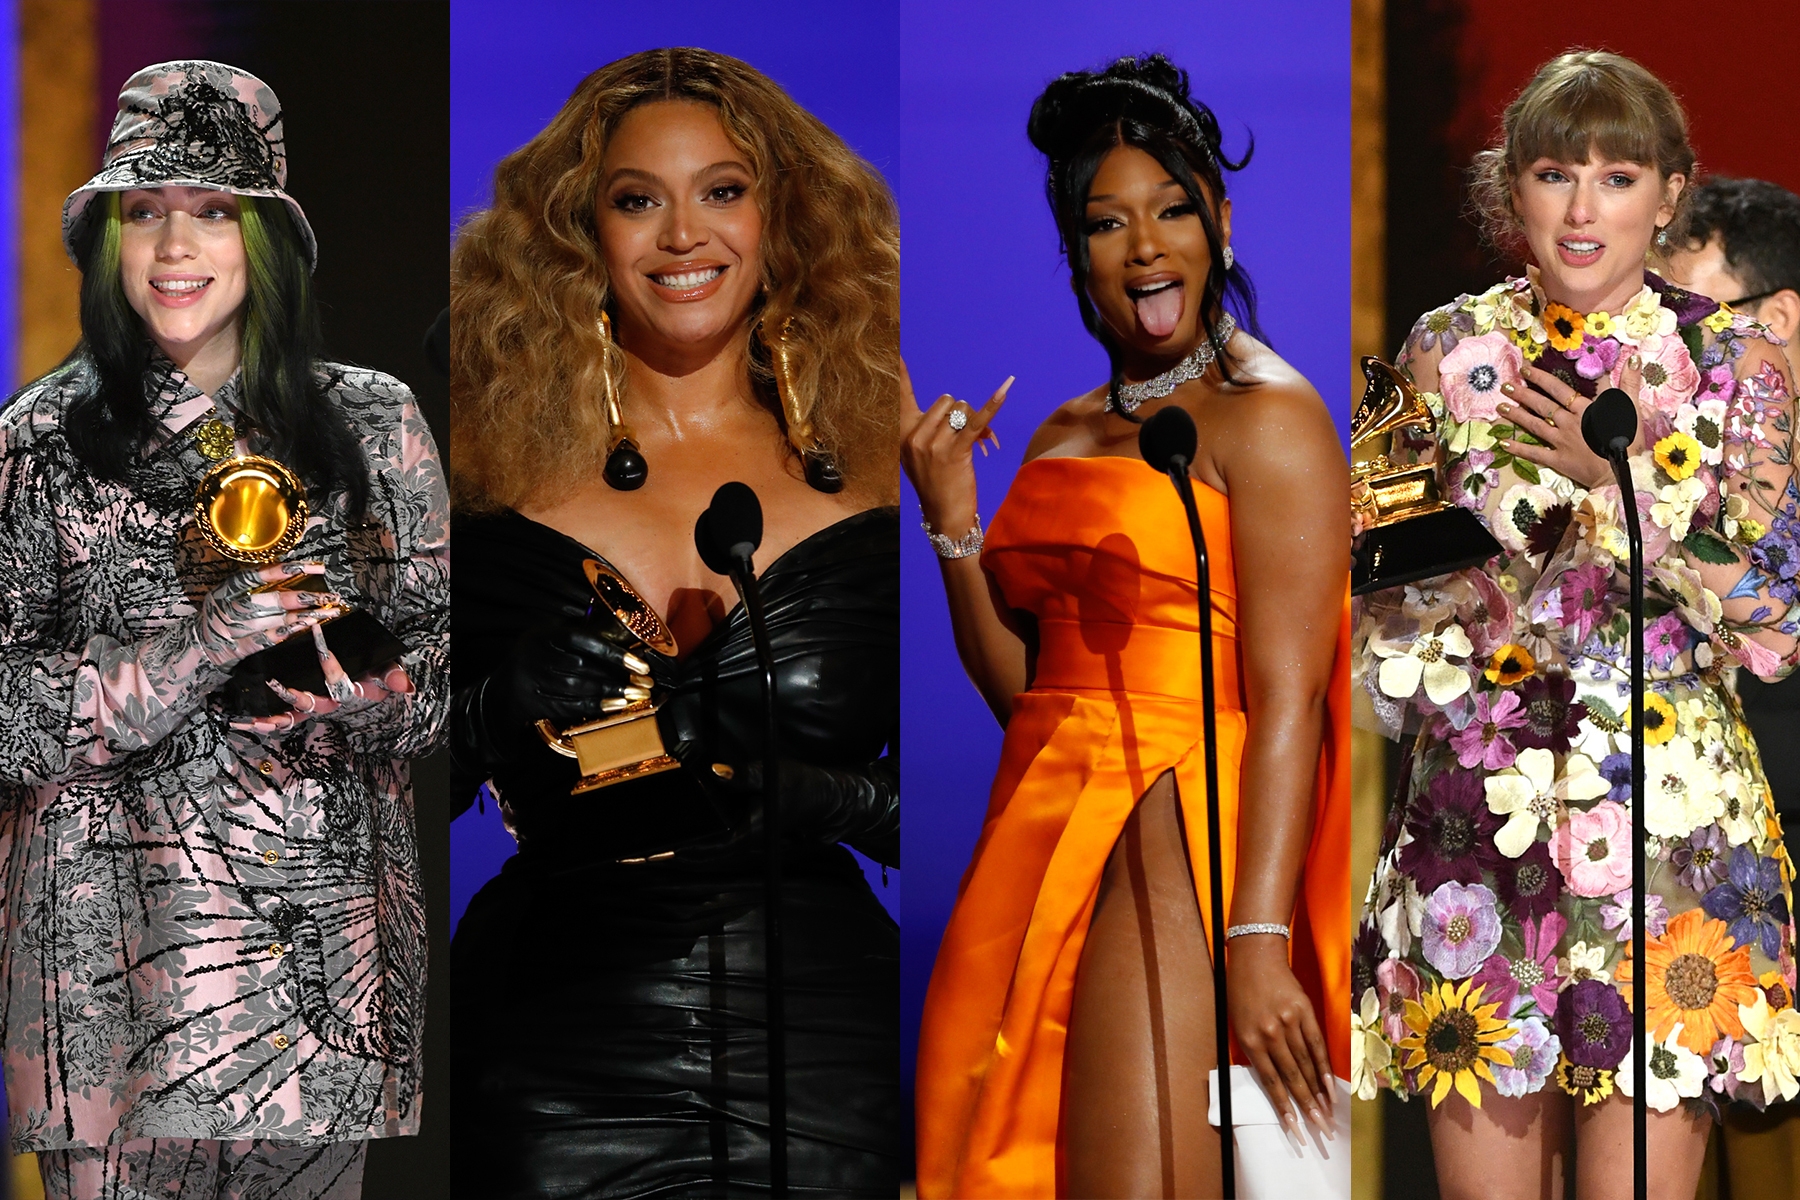 Beyonce May Have Made History, But the Best Awards Are Still Reserved for White Artists